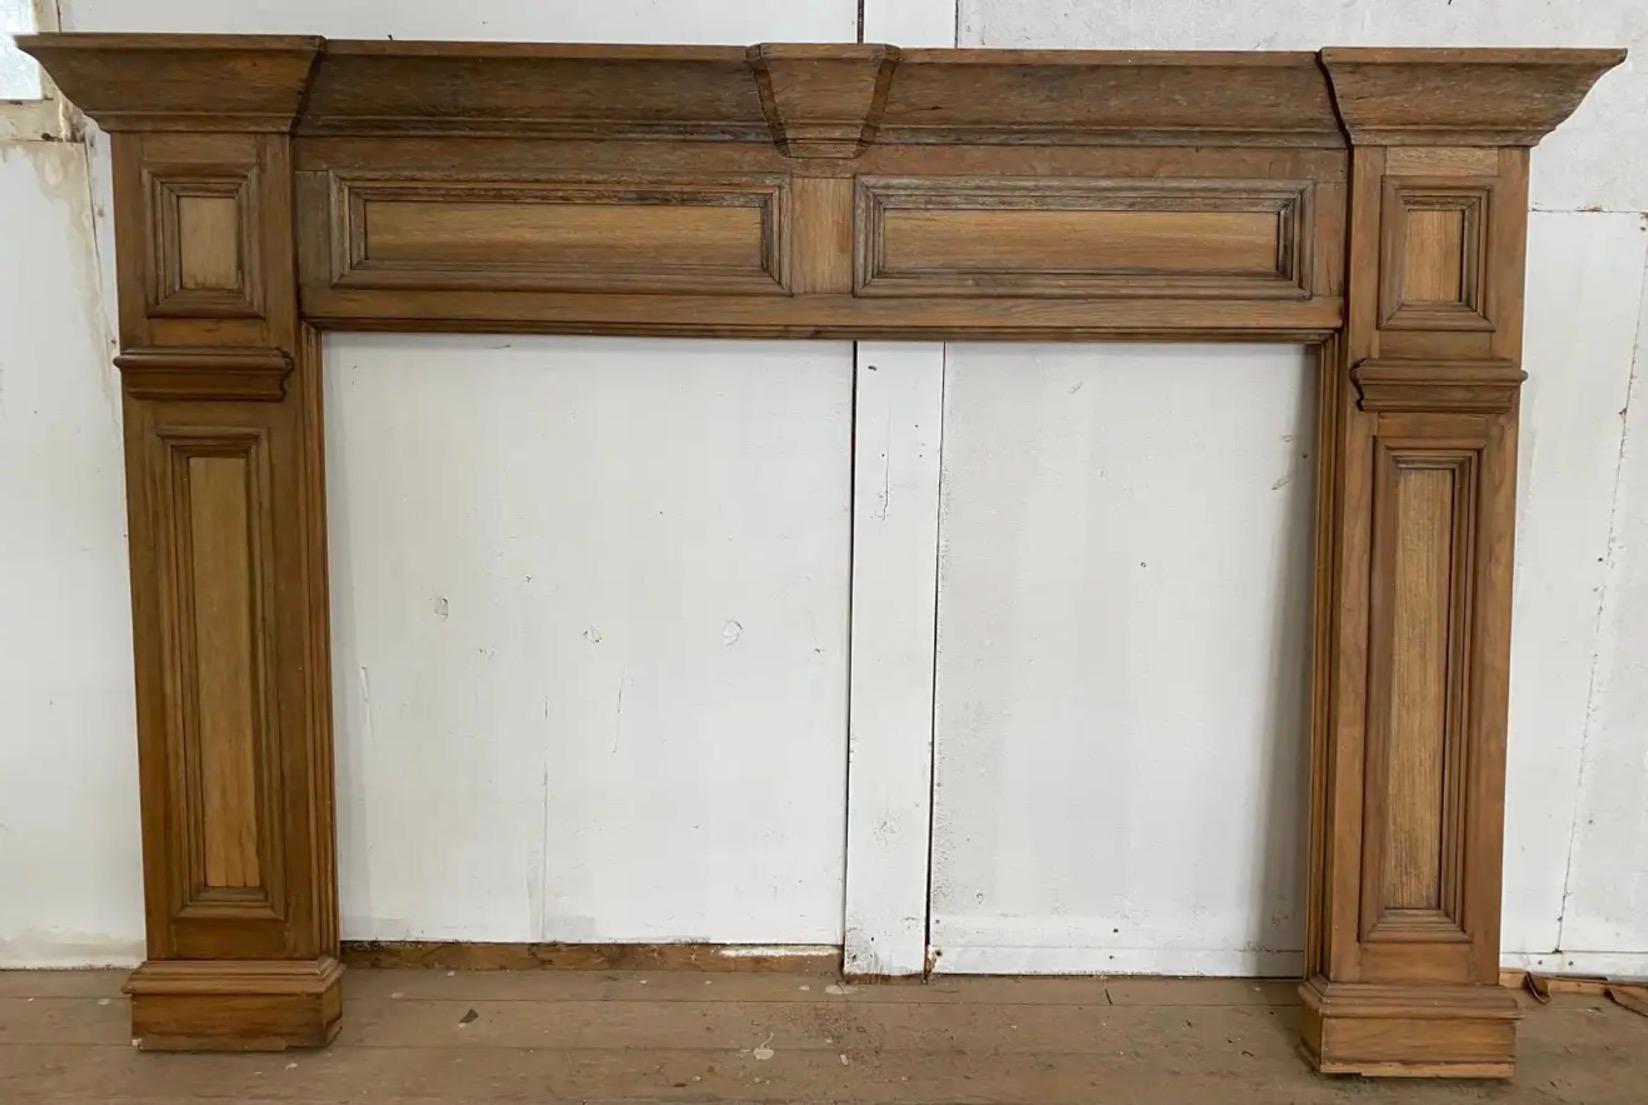 A handsome example of an unusually large American Federal Period wooden fireplace mantel. The wood does show aged wear. Use it as is for added character or refinish for a more finished look. Inside opening: 59